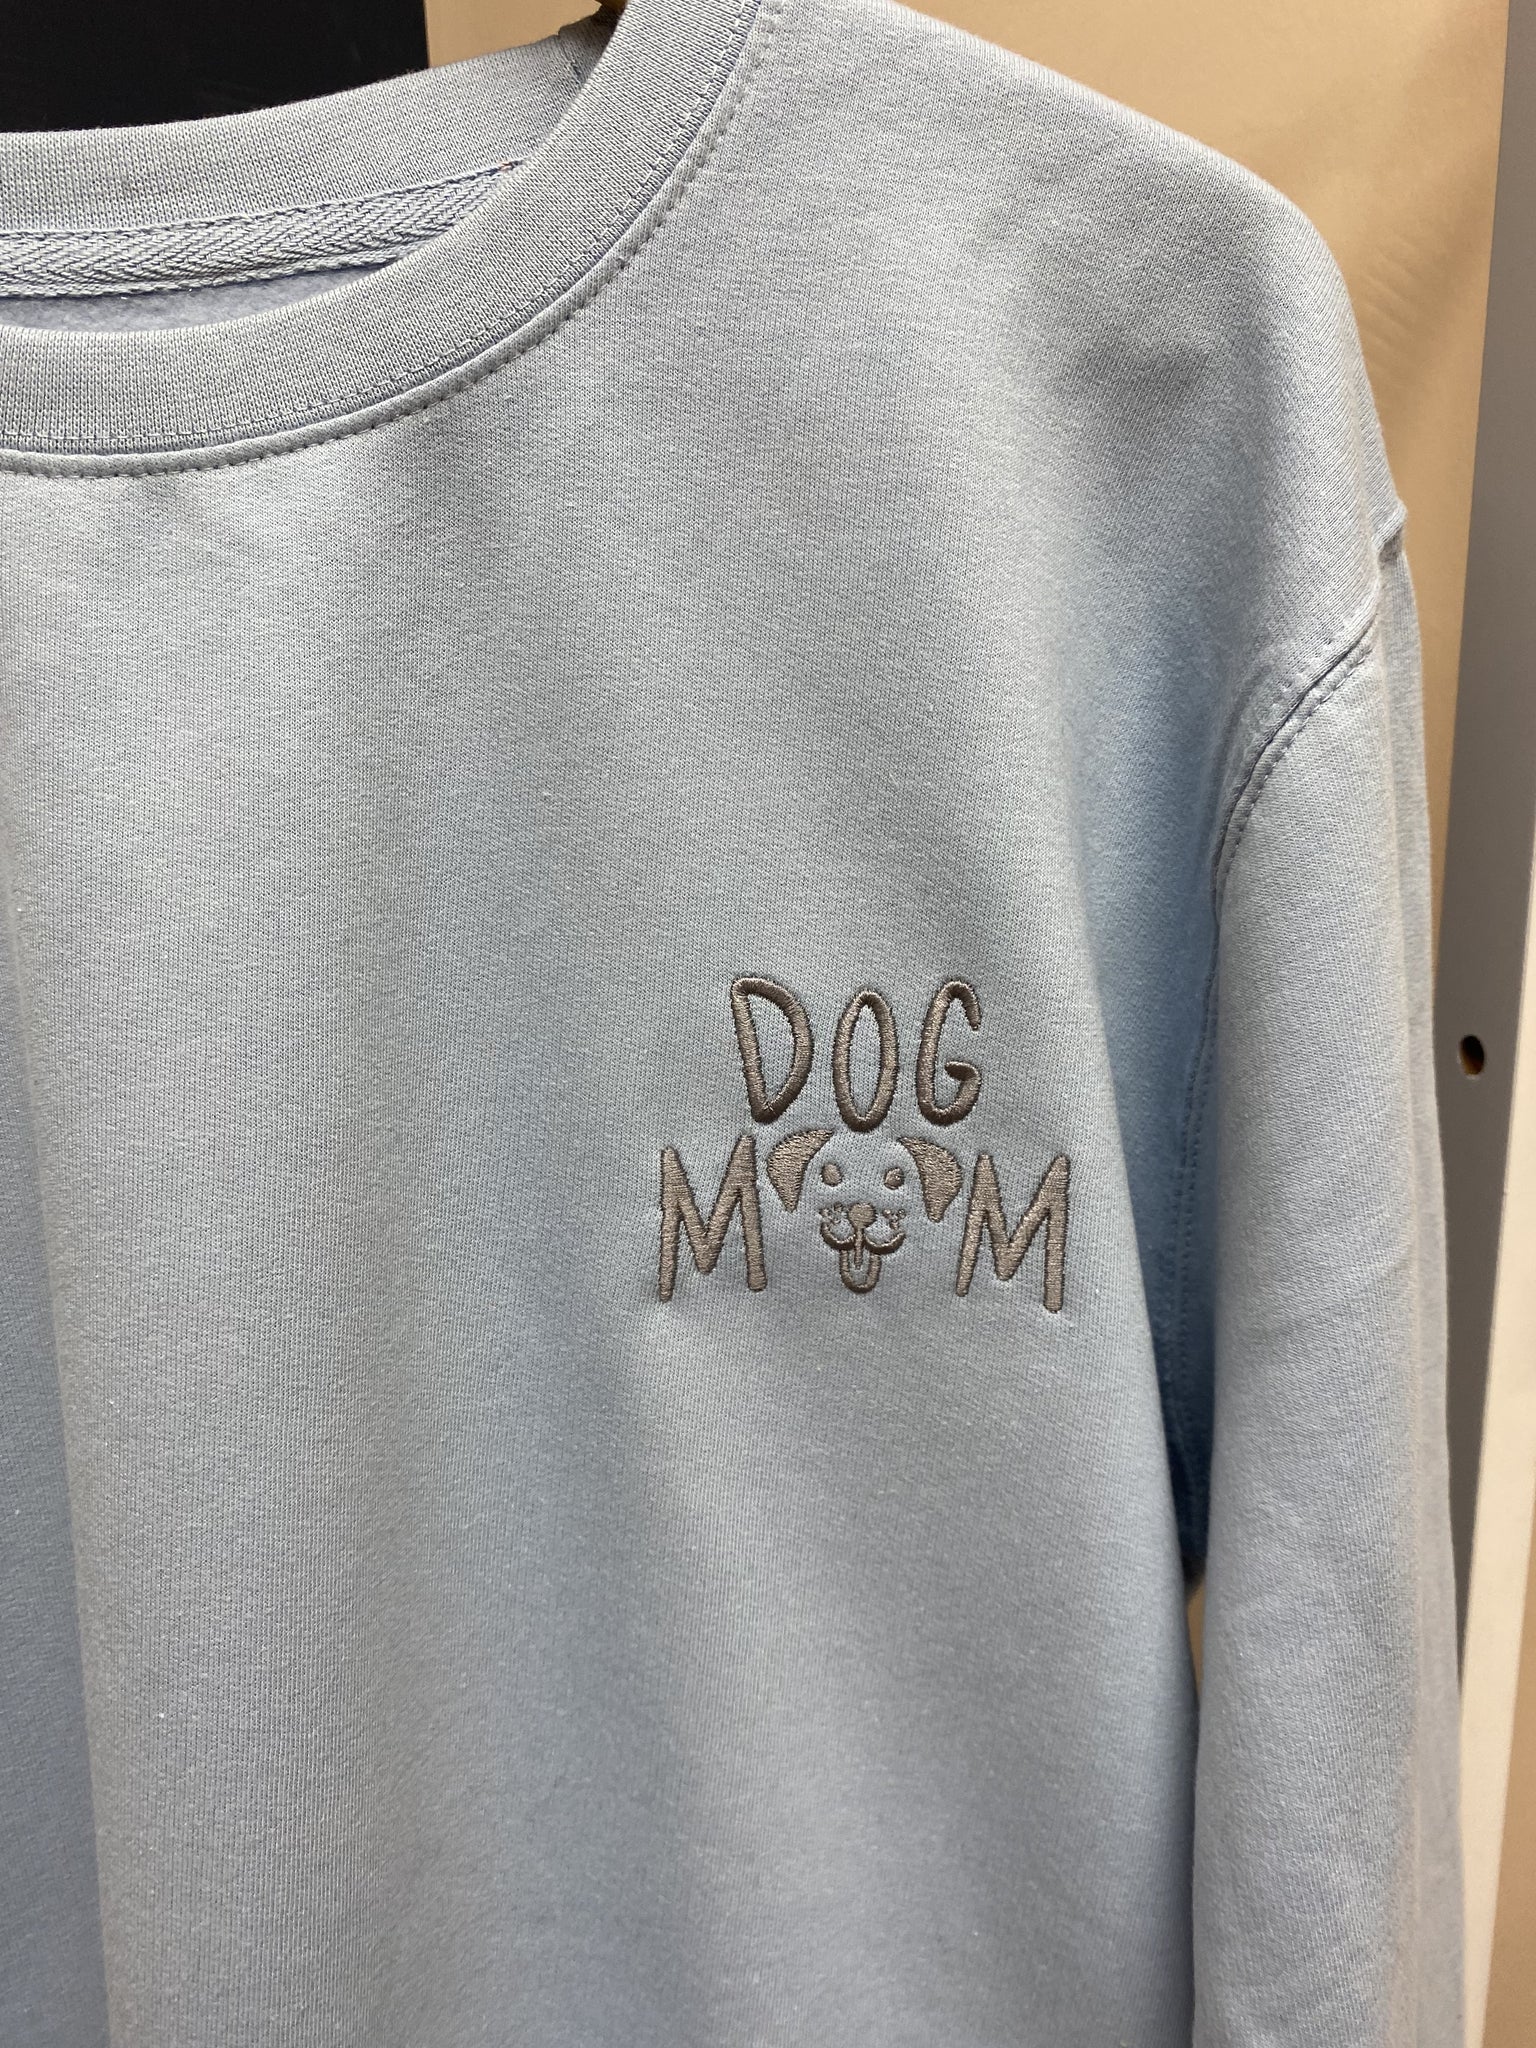 SAMPLE SALE 'Dog Mum' with face Sweater, Baby Blue with Dark Grey Stitching, ALL SIZES